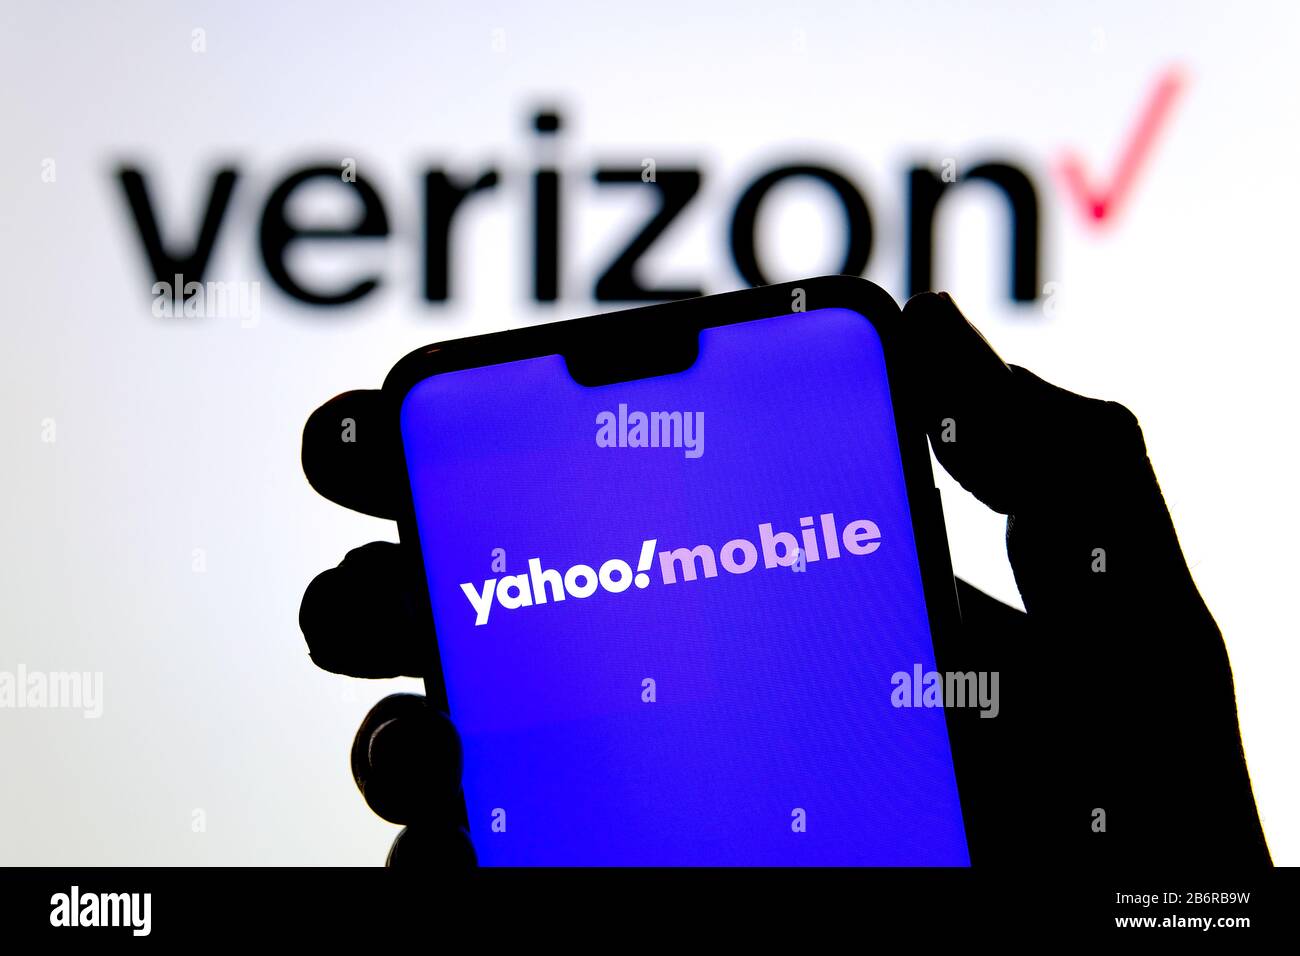 Stone / United Kingdom - March 11 2020: Yahoo! Mobile logo on the silhouette of smartphone hold in a hand and Verizon logo on the blurred background. Stock Photo